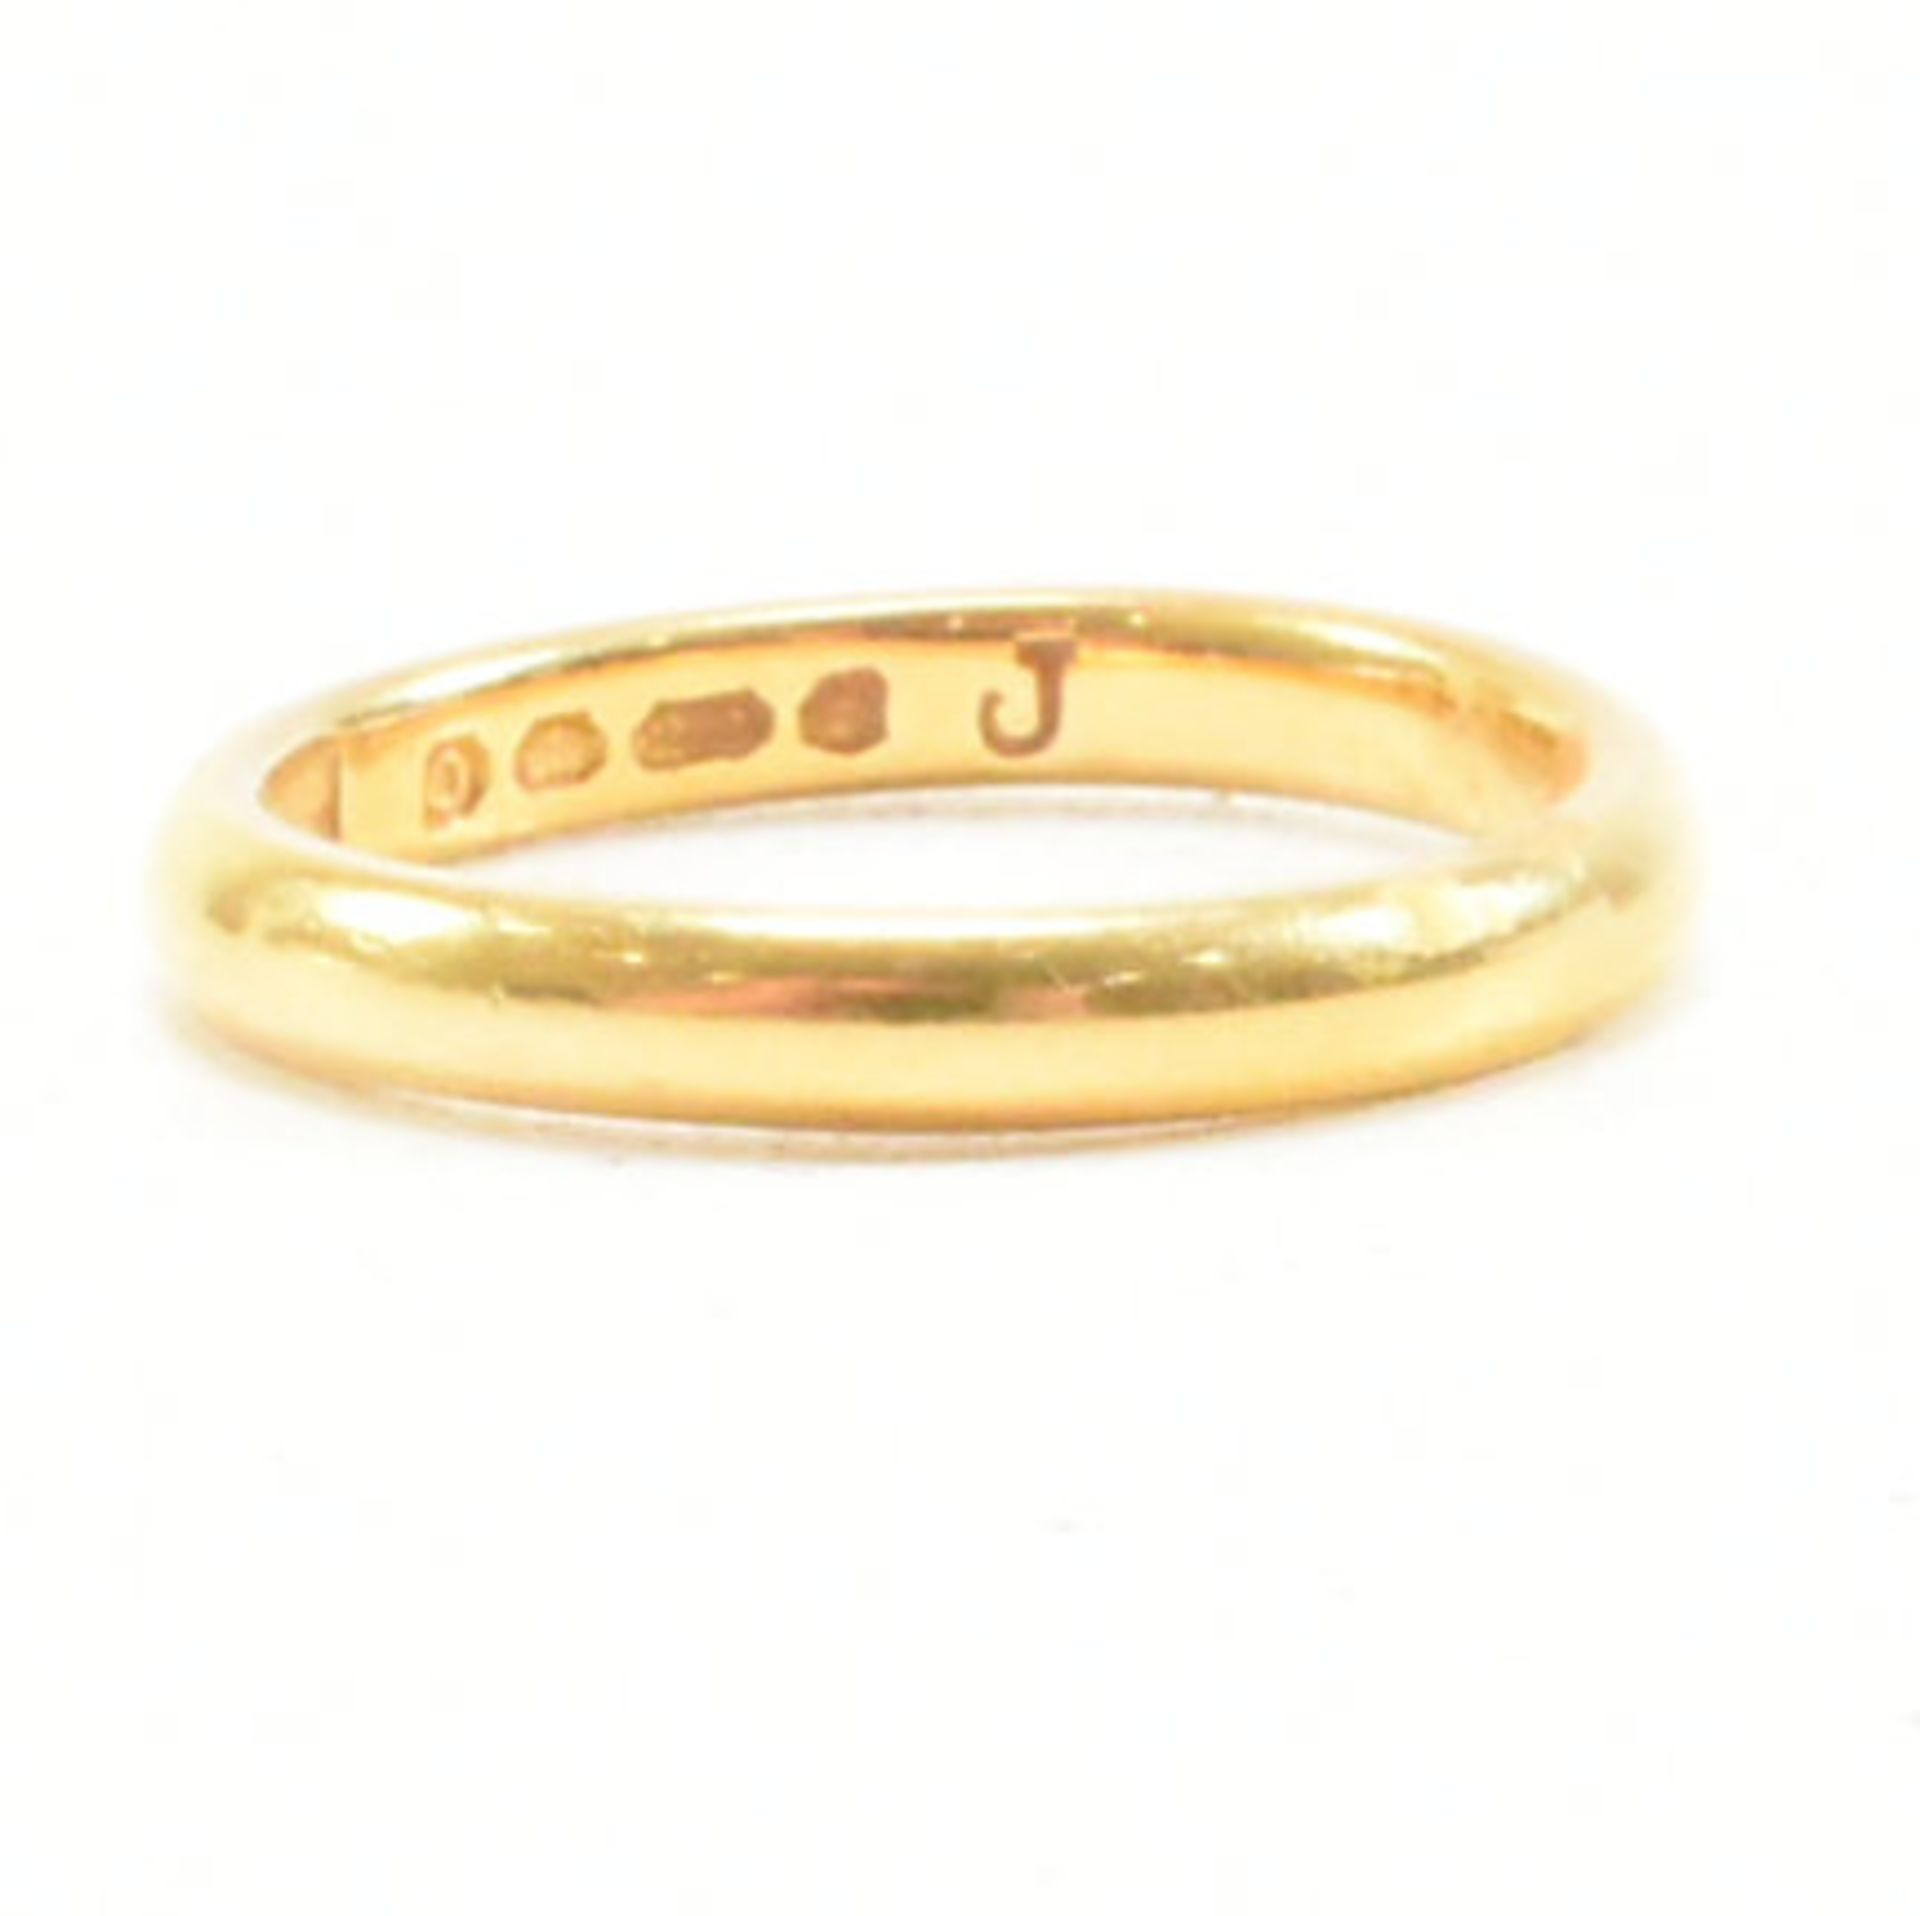 HALLMARKED 22CT GOLD BAND RING - Image 3 of 8